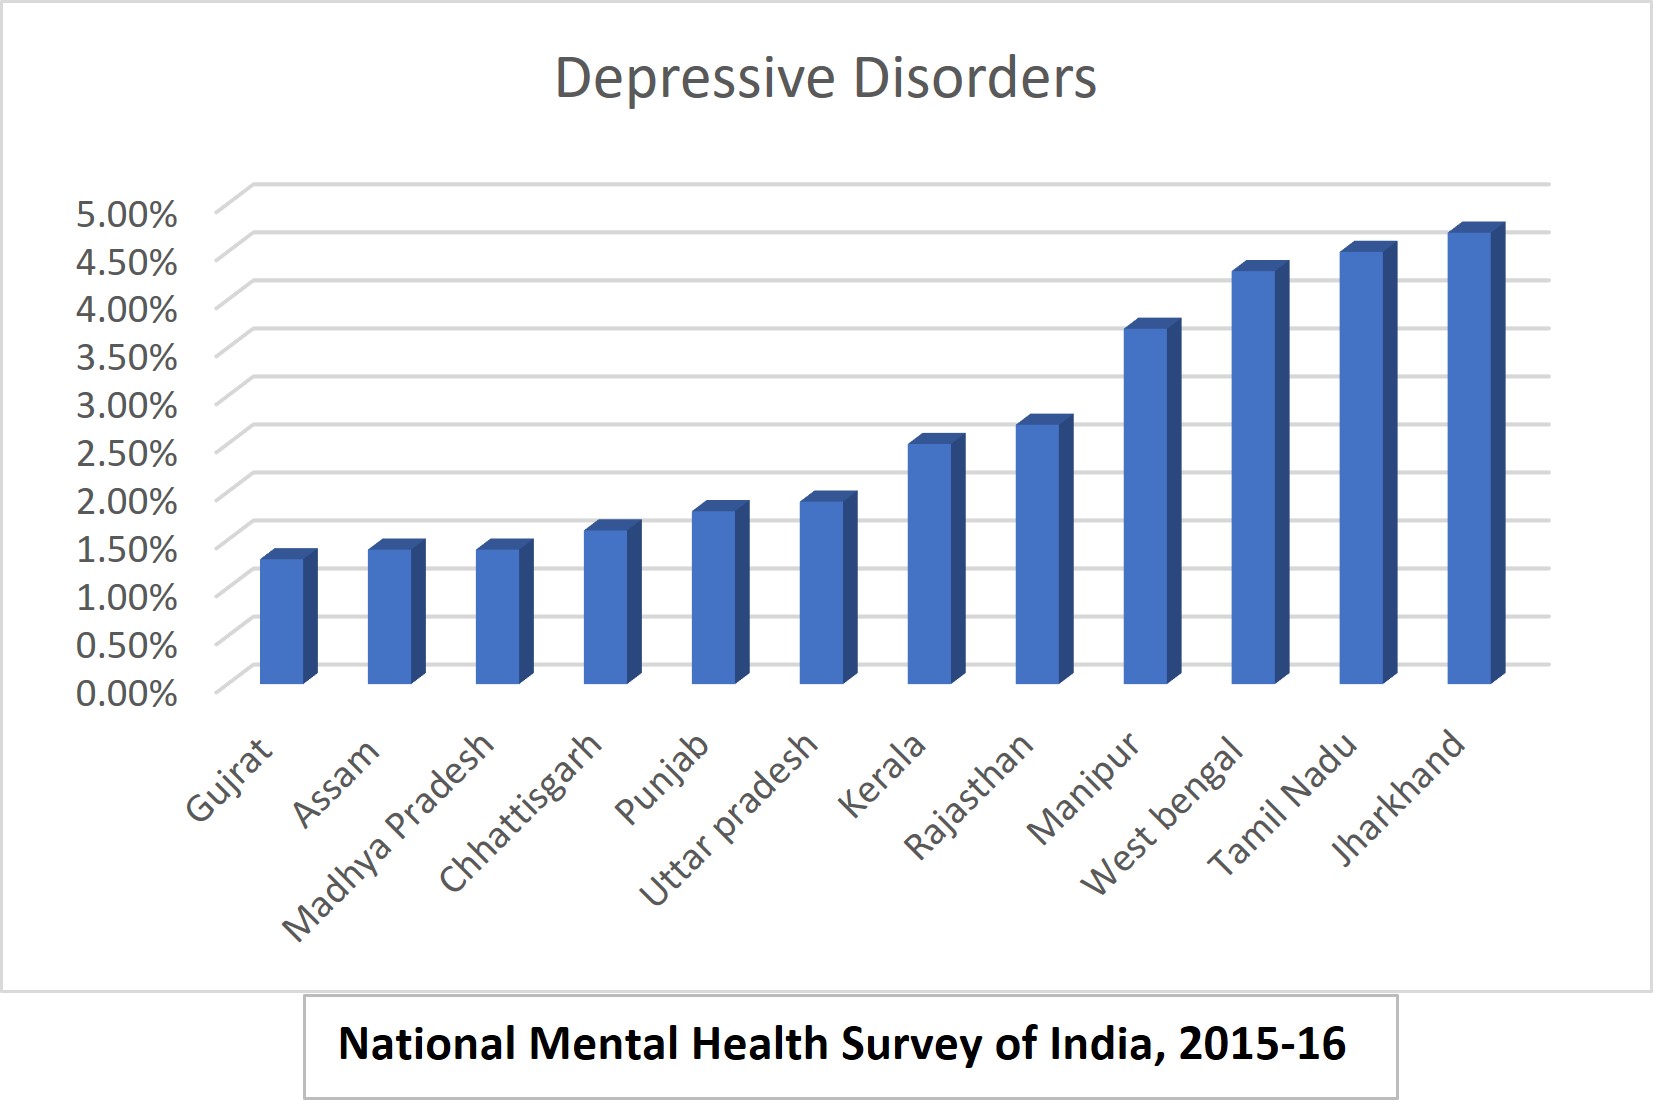 Depression rates by states in India